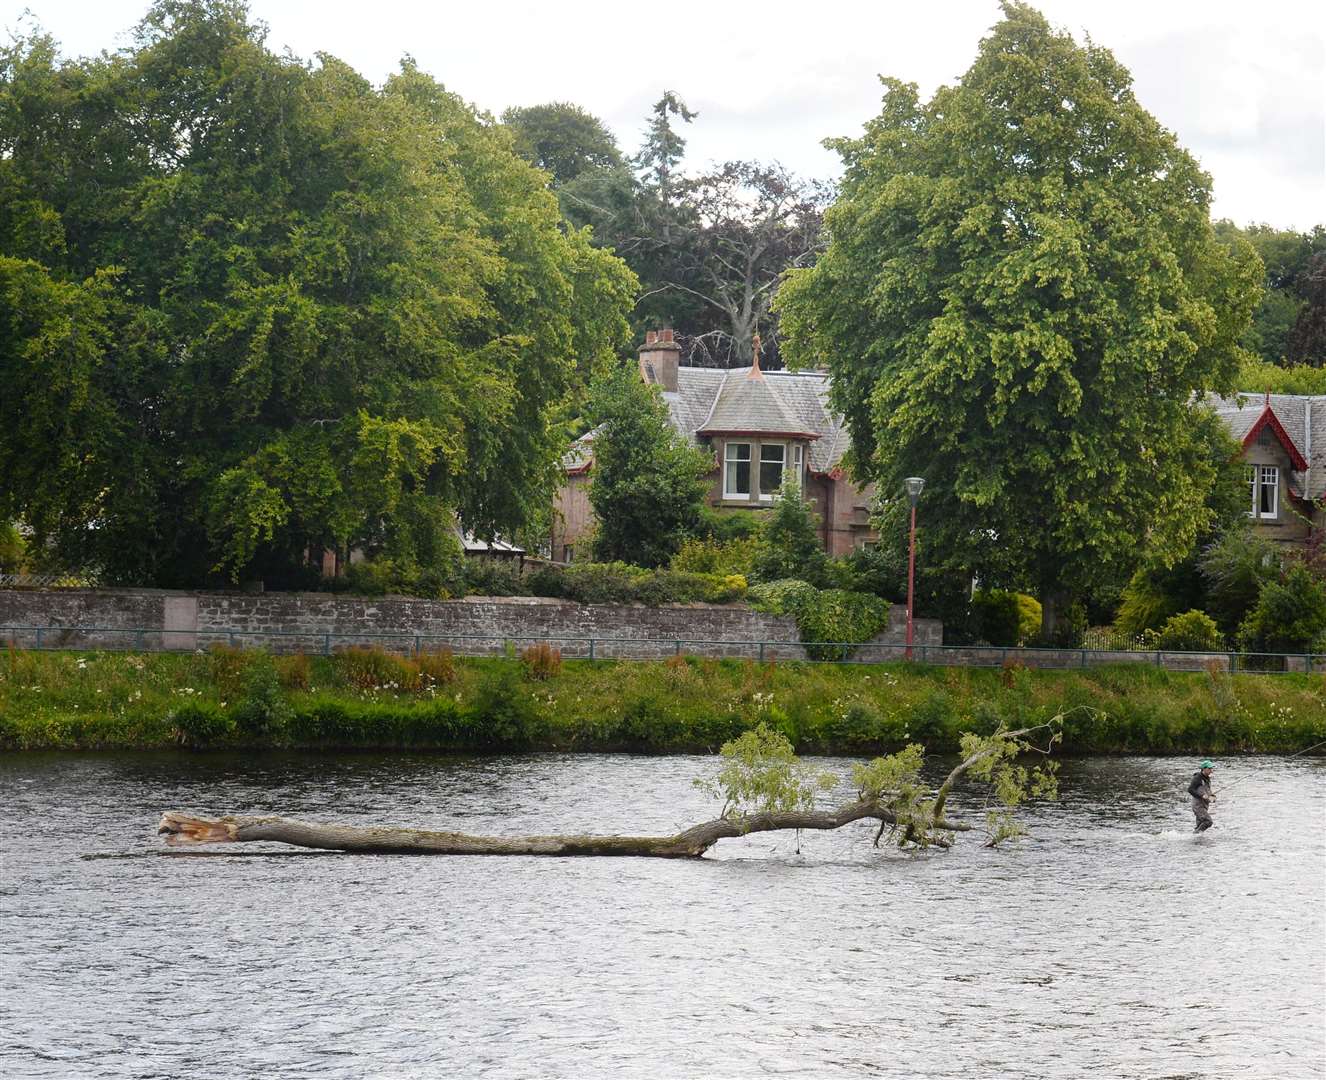 An angler tries their luck close to the large fallen tree, which has beached on submerged gravel in this shallow part of the River Ness.